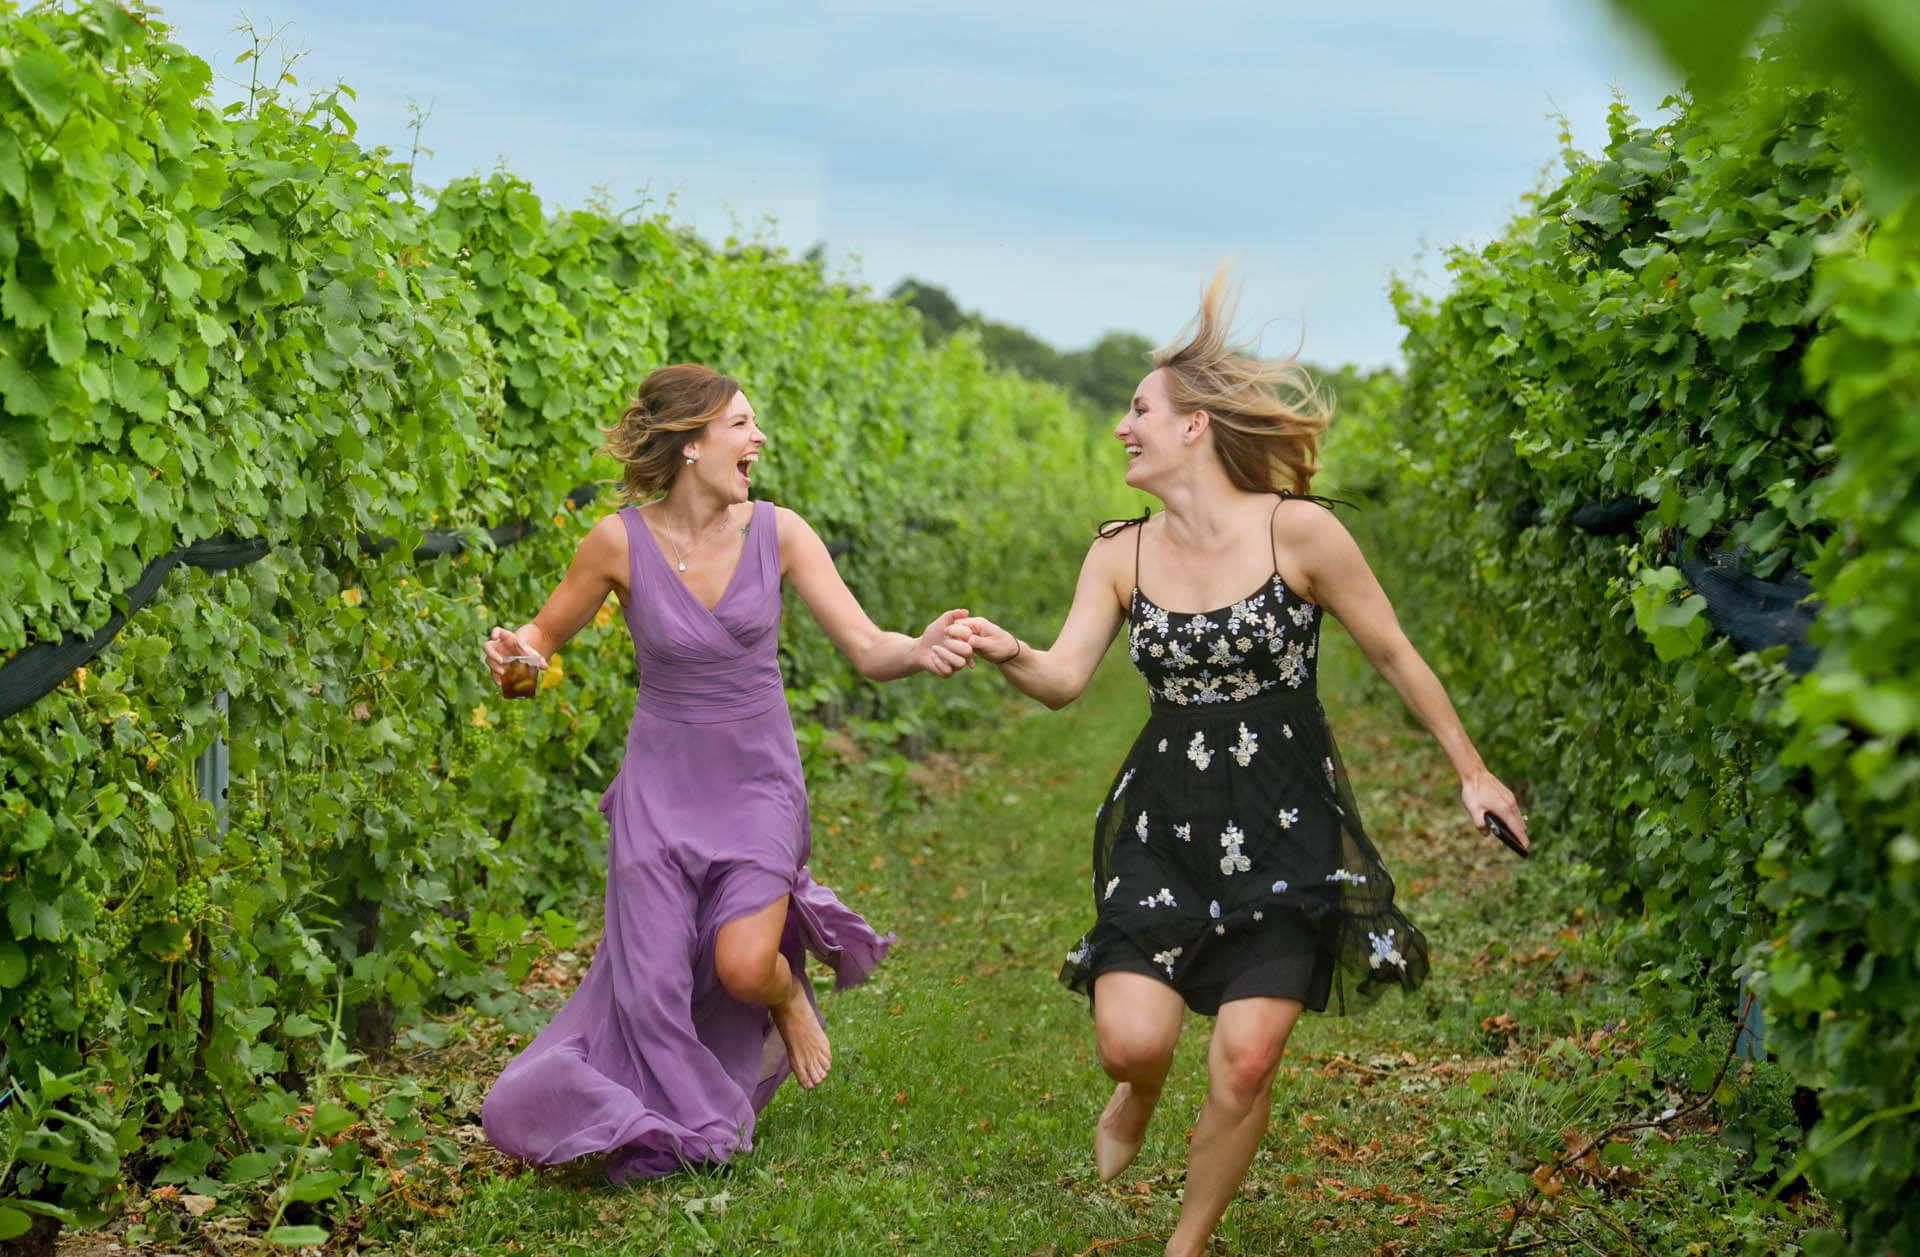 Two wedding guests run through a vineyard after a destination wedding in Traverse City, Michigan for this fun wedding photo.